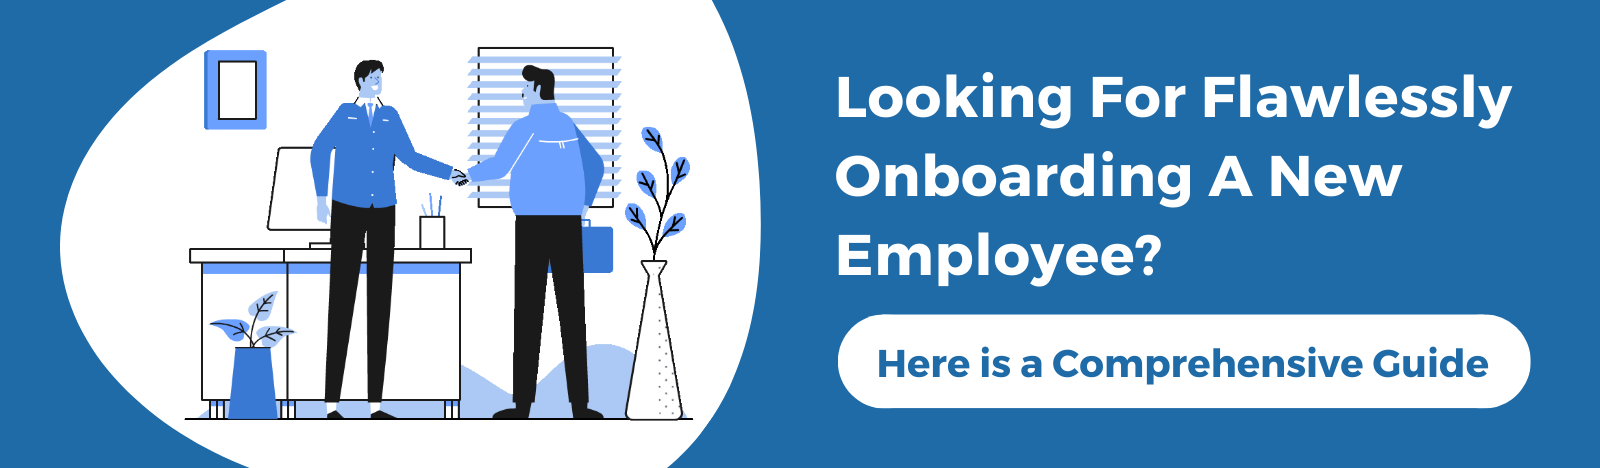 Looking For Flawlessly Onboarding A New Employee? – Comprehensive Guide